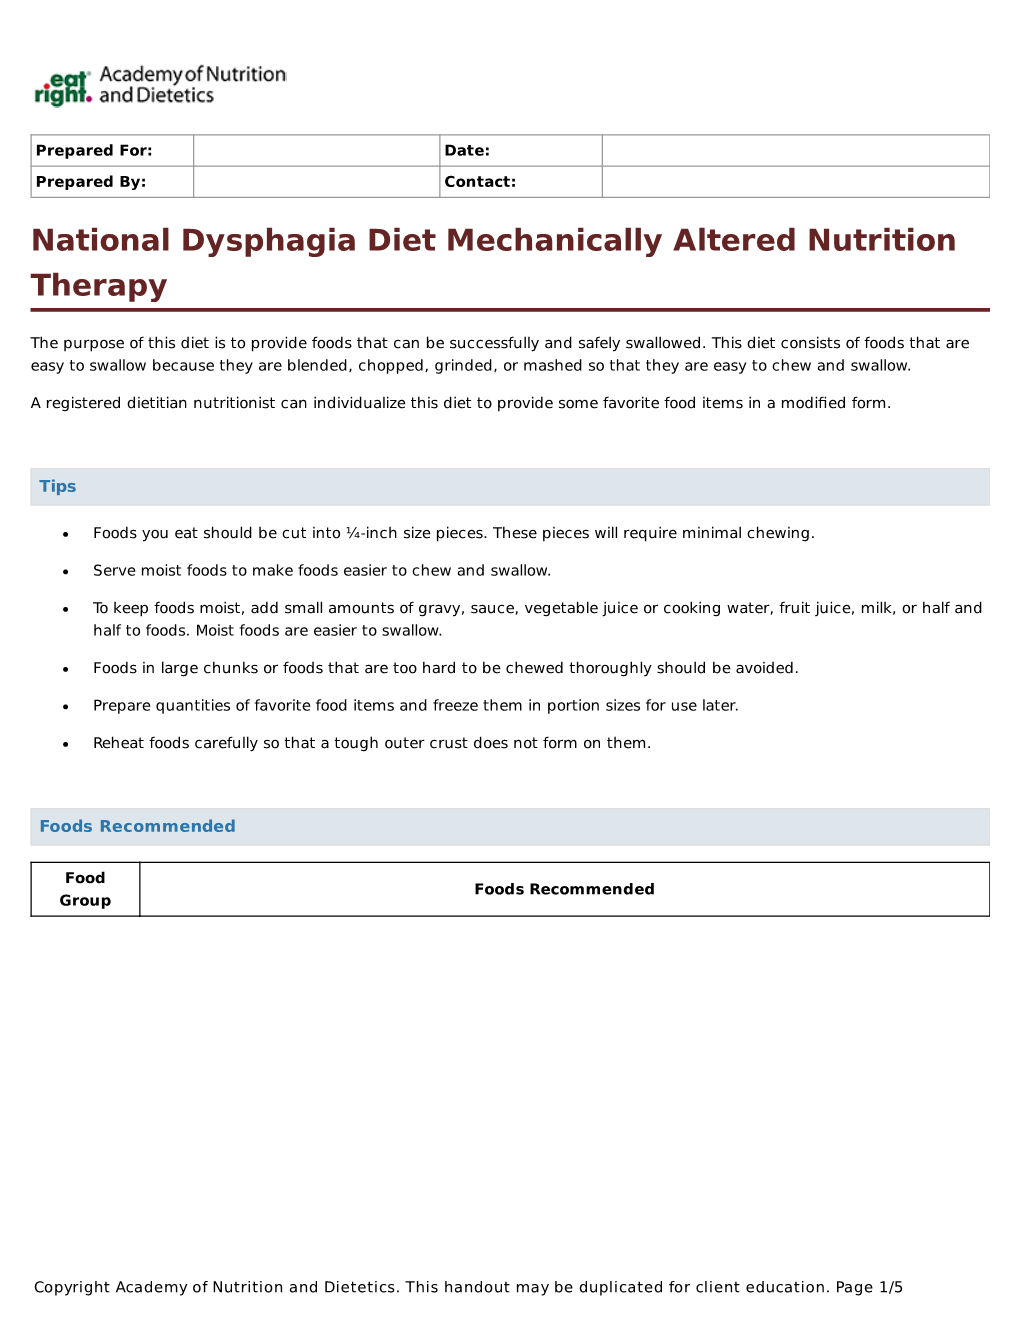 National Dysphagia Diet Mechanically Altered Nutrition Therapy